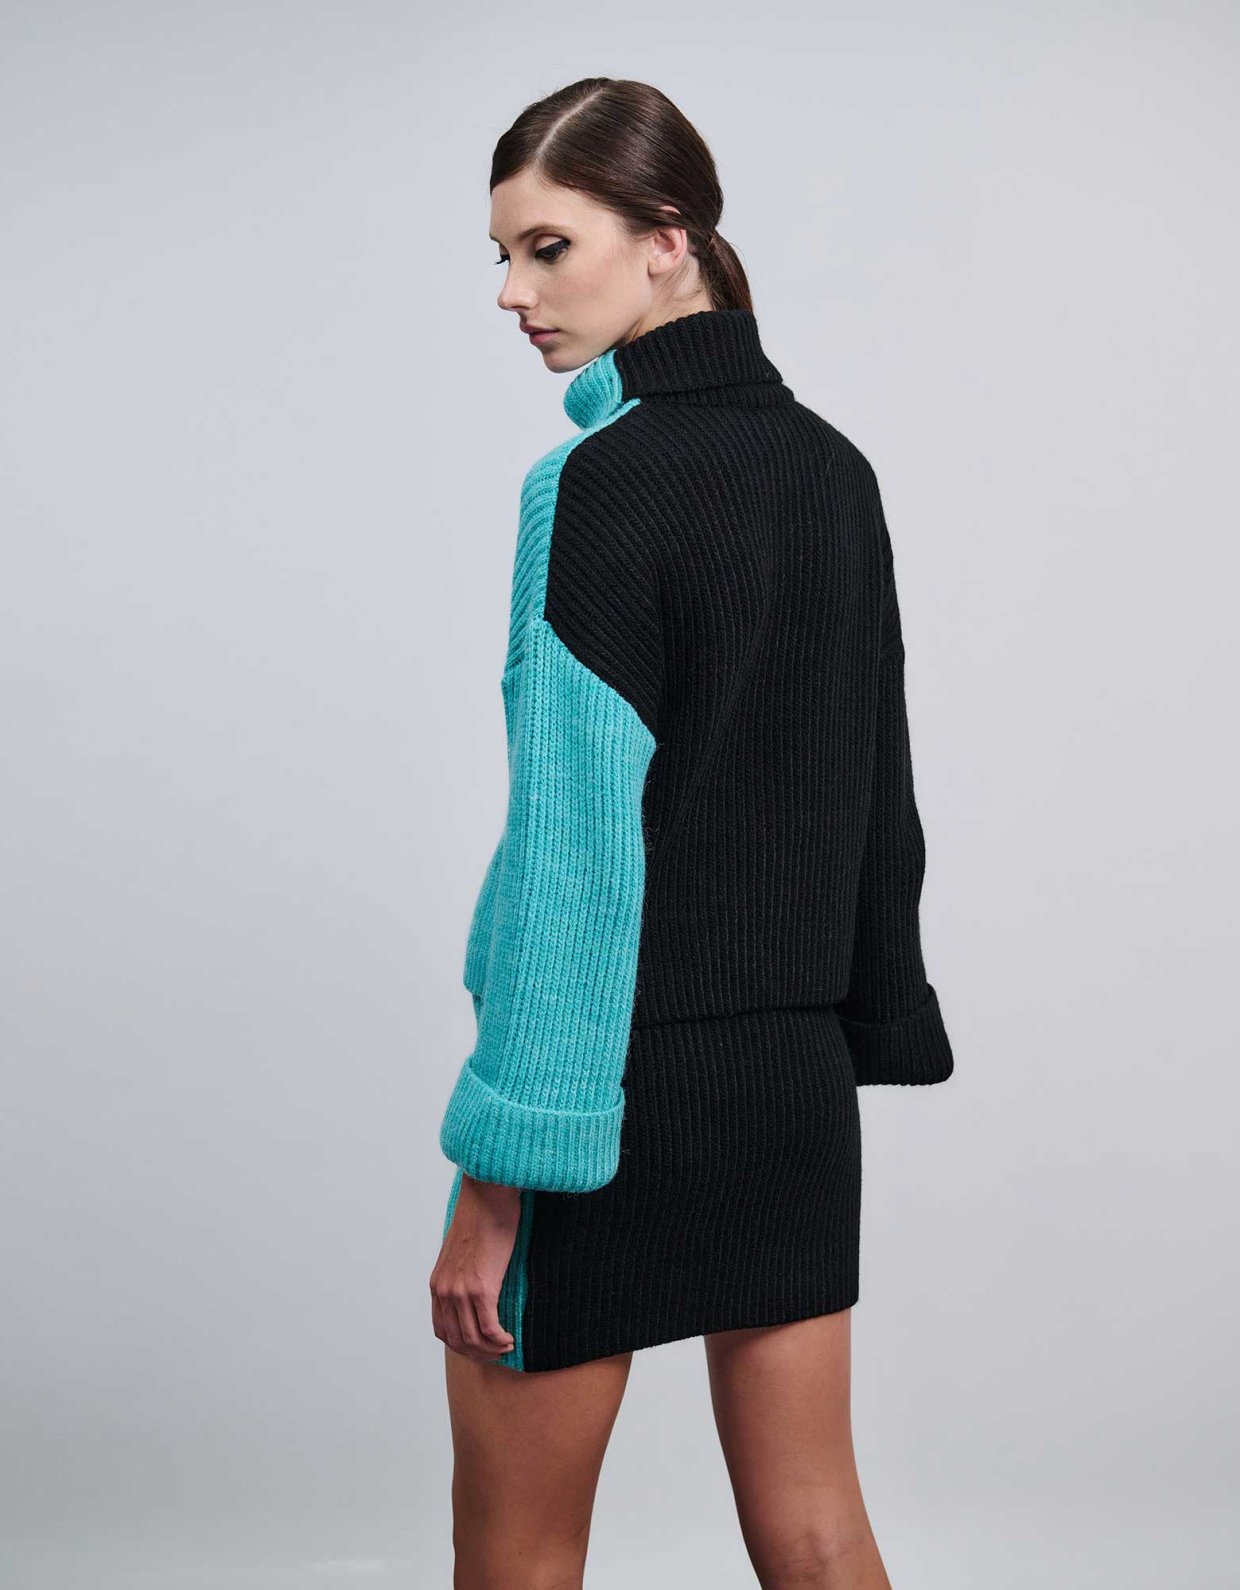 Combos Knitwear Two colours sweater black petrol